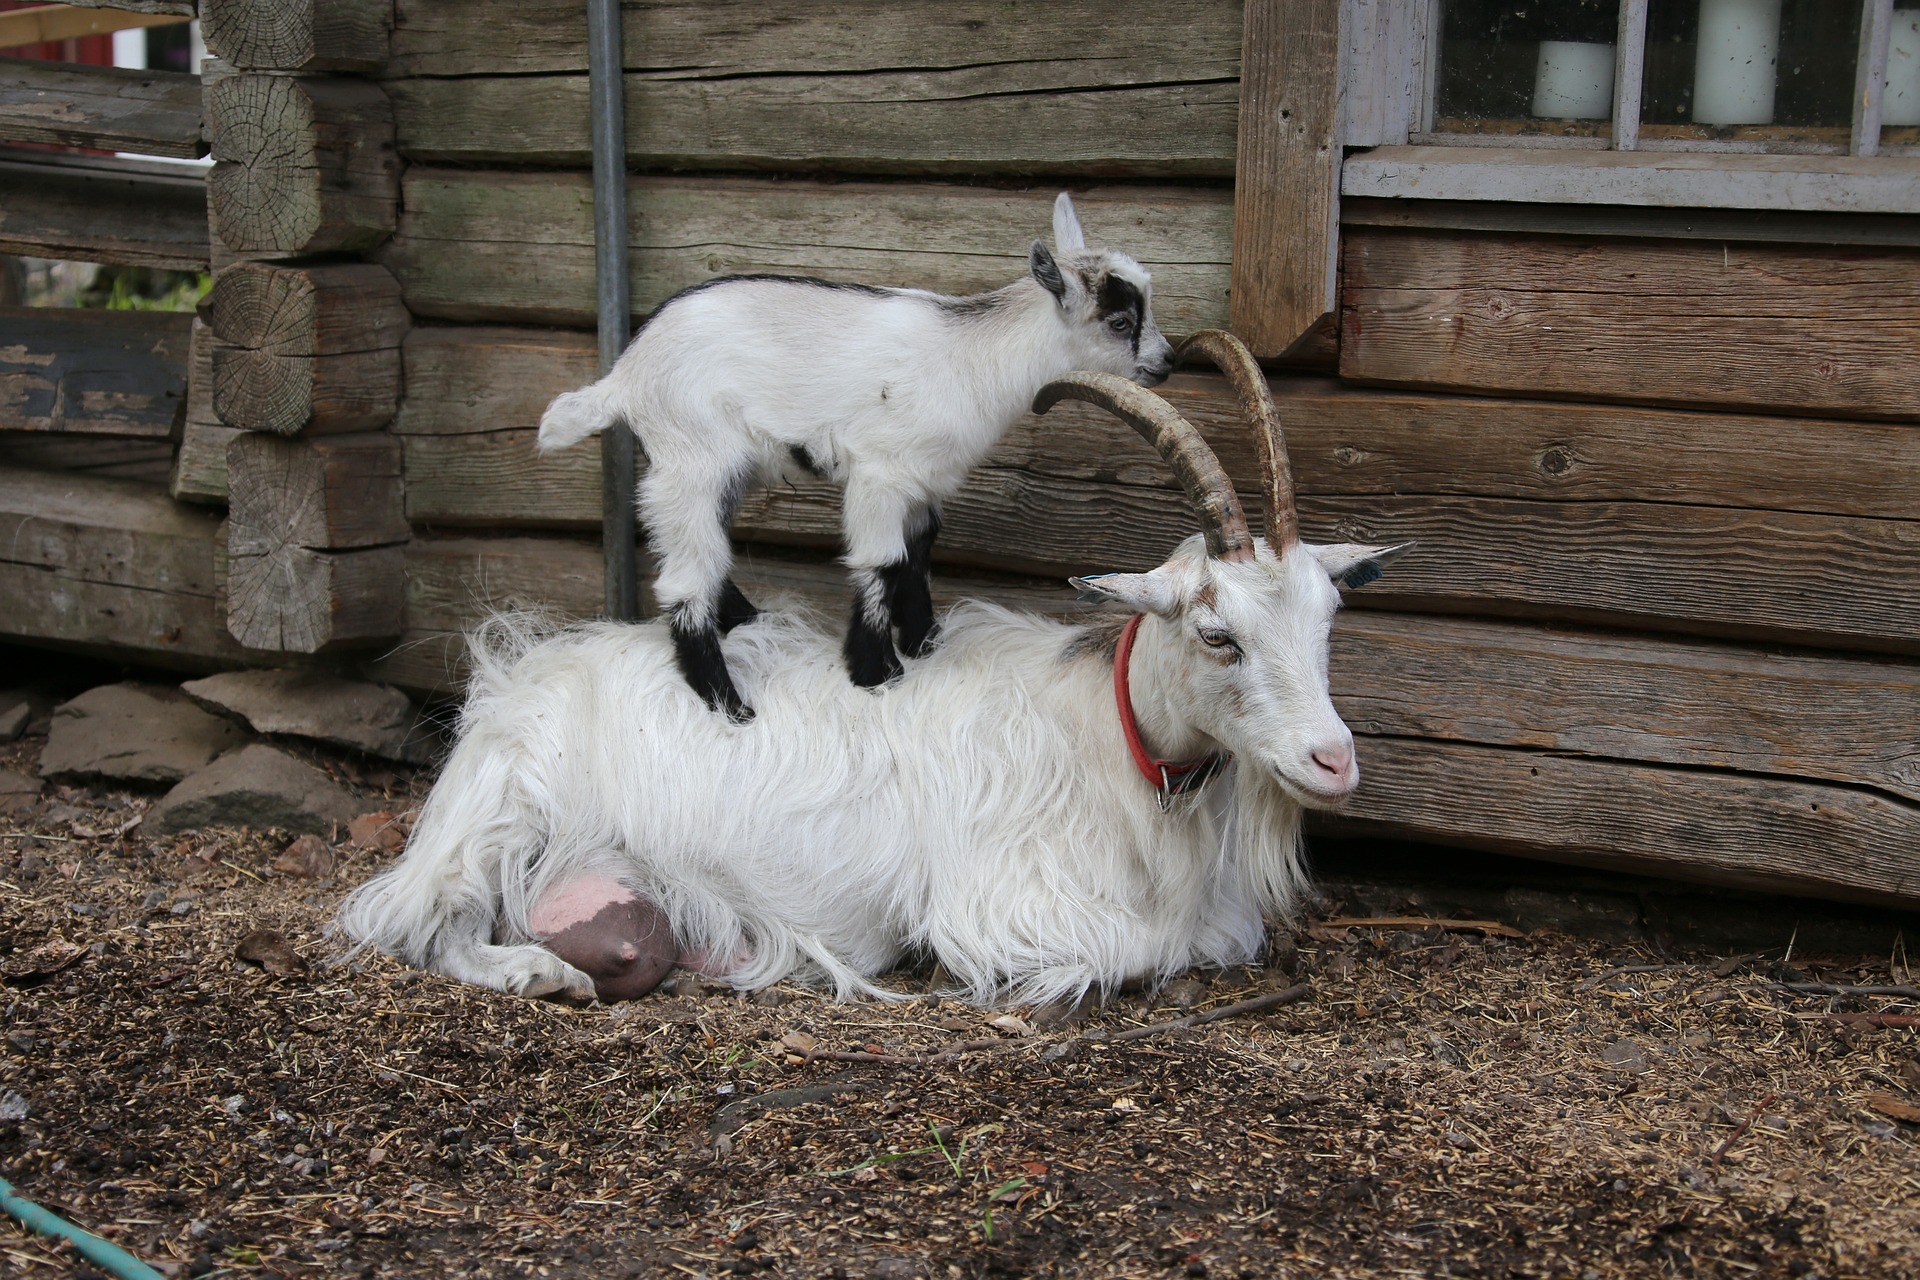 A nanny goat with huge udder is lying down, her weight against an olde wooden cabin. Atop her a kid (a baby goat) balances. The nanny goat seems unfazed, patient.